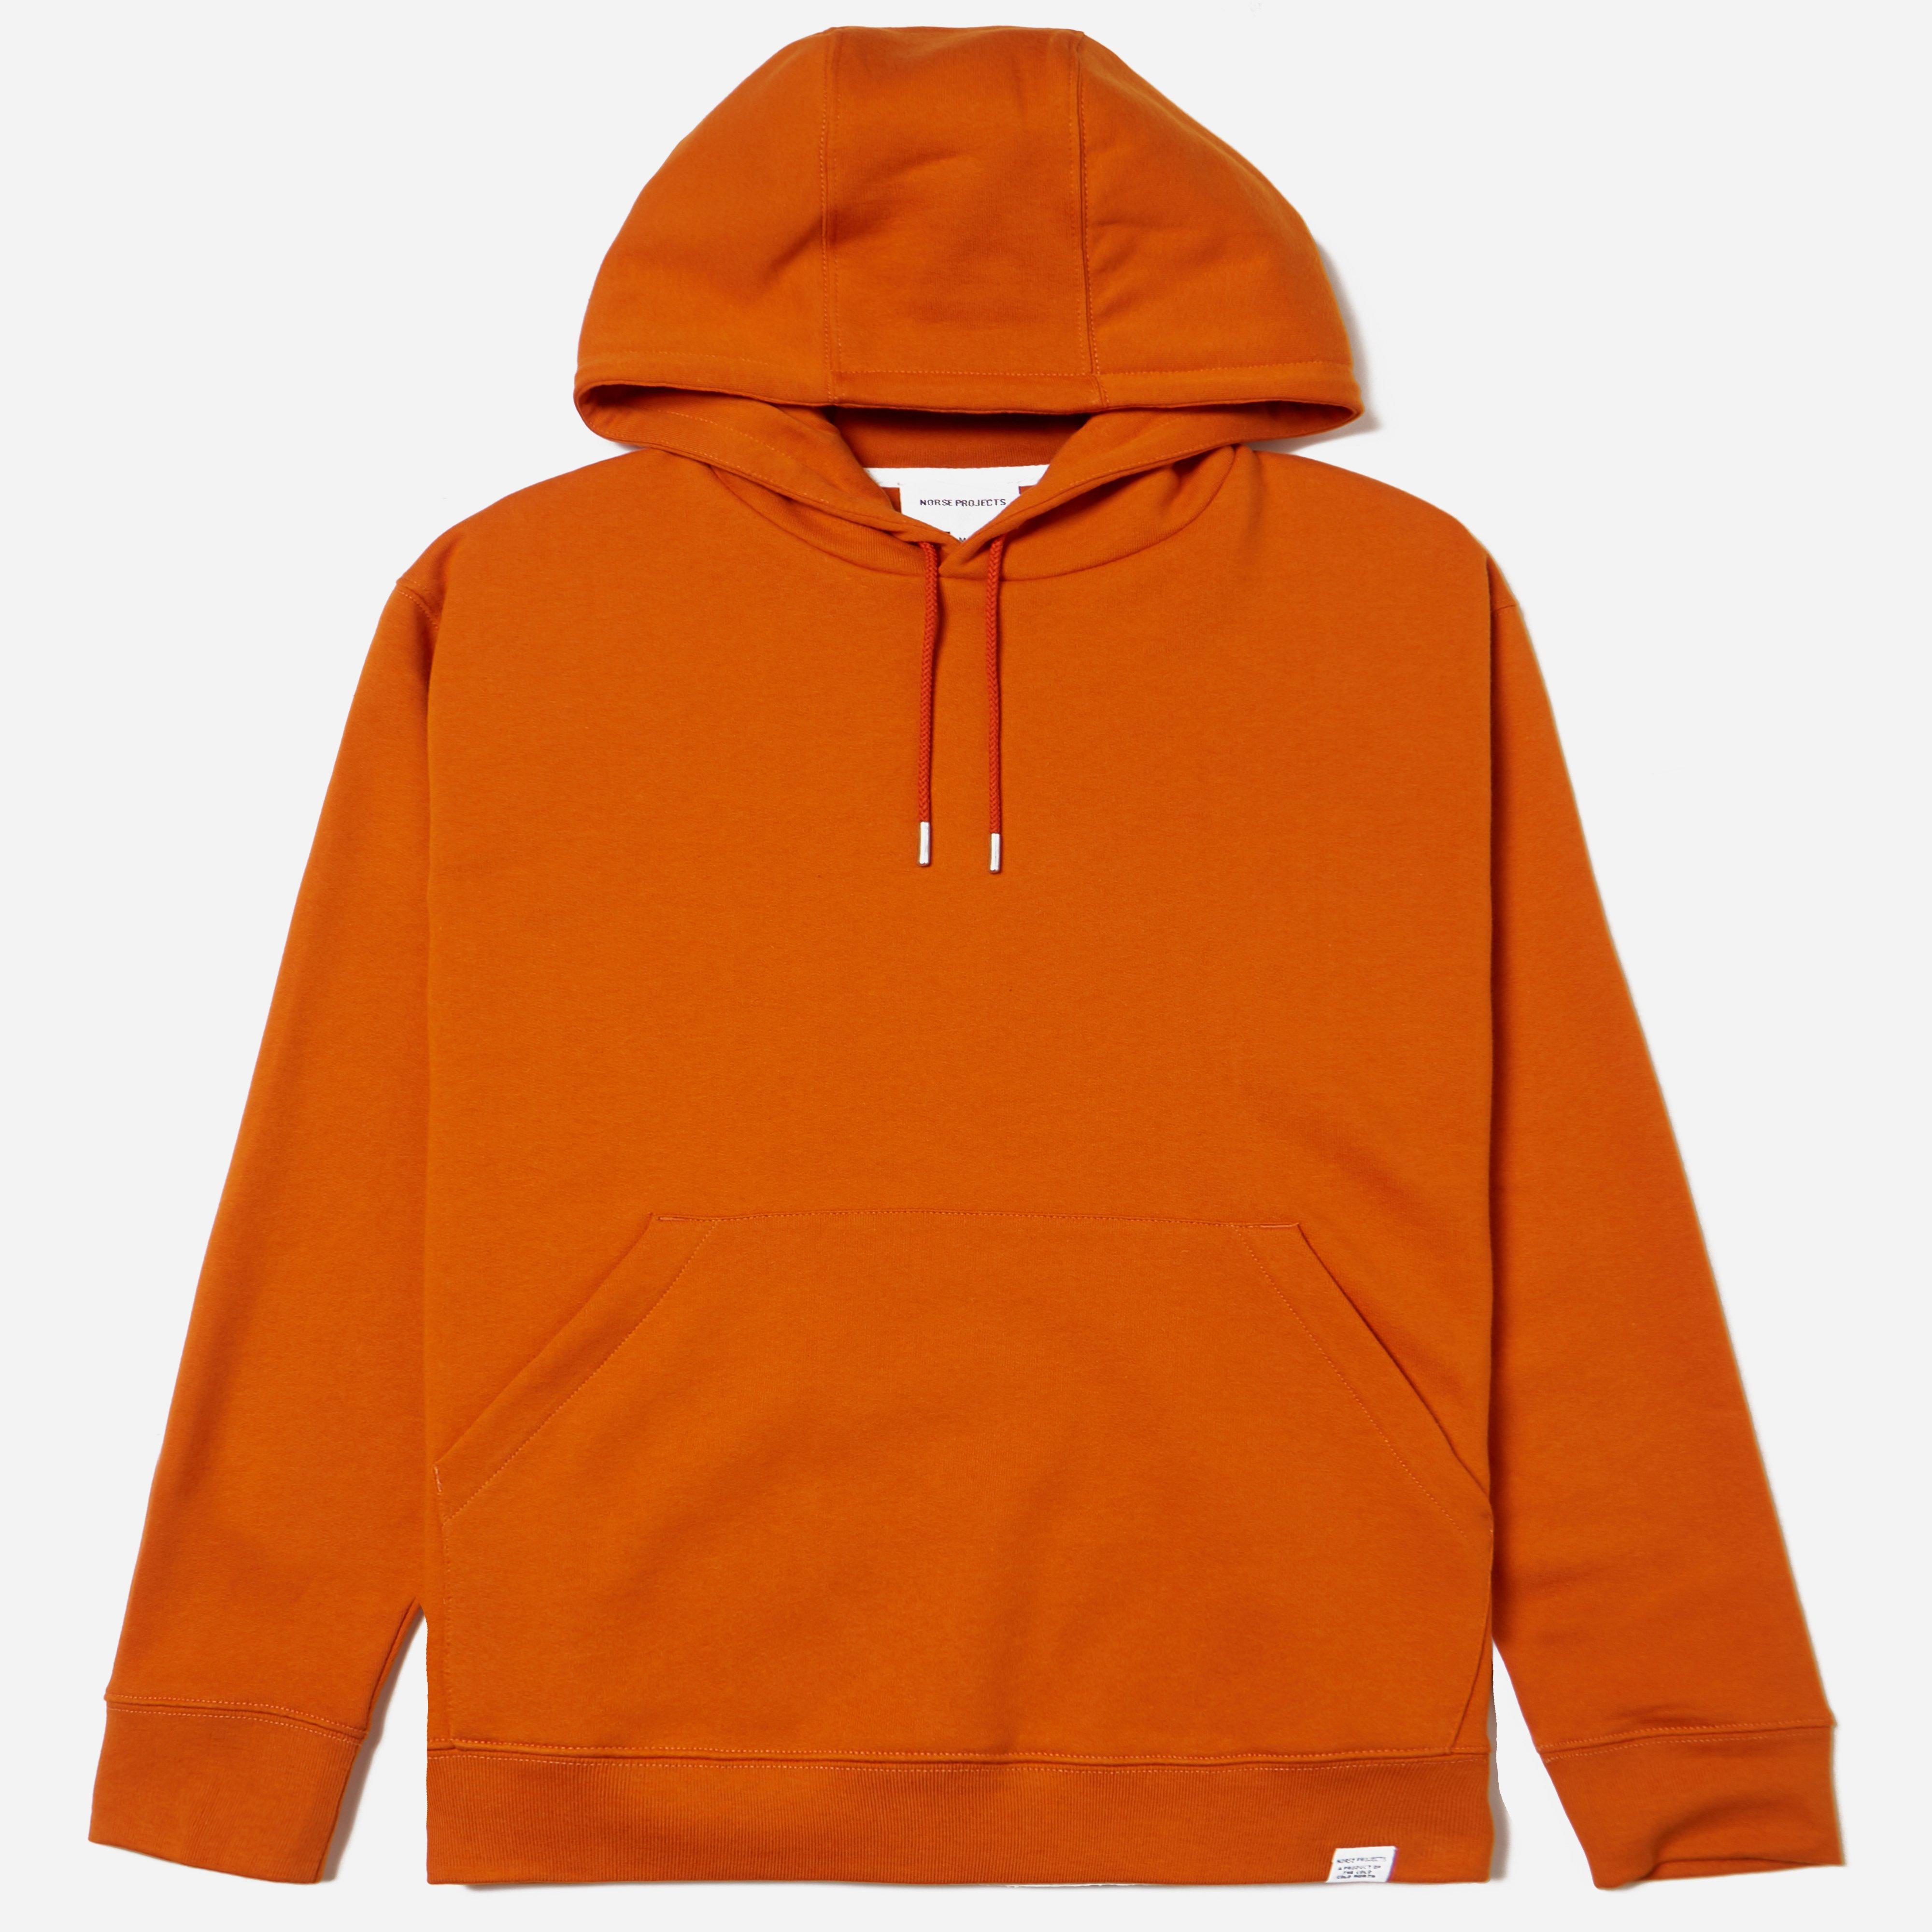 Norse Projects Cotton Vagn Classic Hoodie in Orange for Men - Lyst